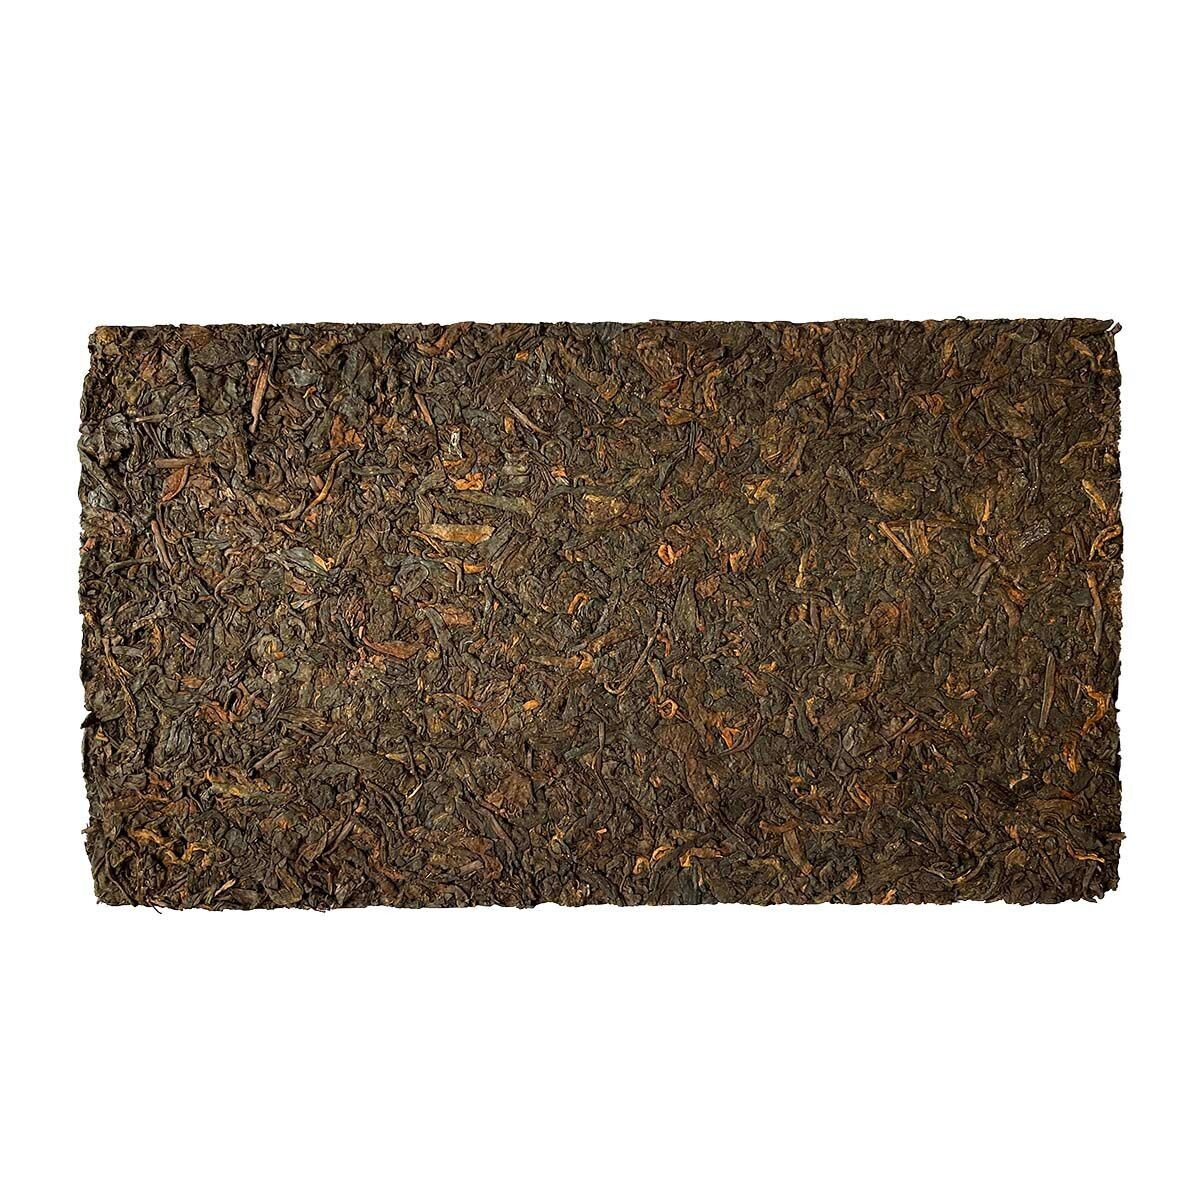 Indulge in the rich heritage and unparalleled flavor of Menghai 1997 Shu Puerh, a distinguished masterpiece crafted in the heart of Yunnan Province, China. Processed with expertise in 1997, this exceptional tea emanates from the ancient tea trees nestled on Brown Mountain in Menghai county.